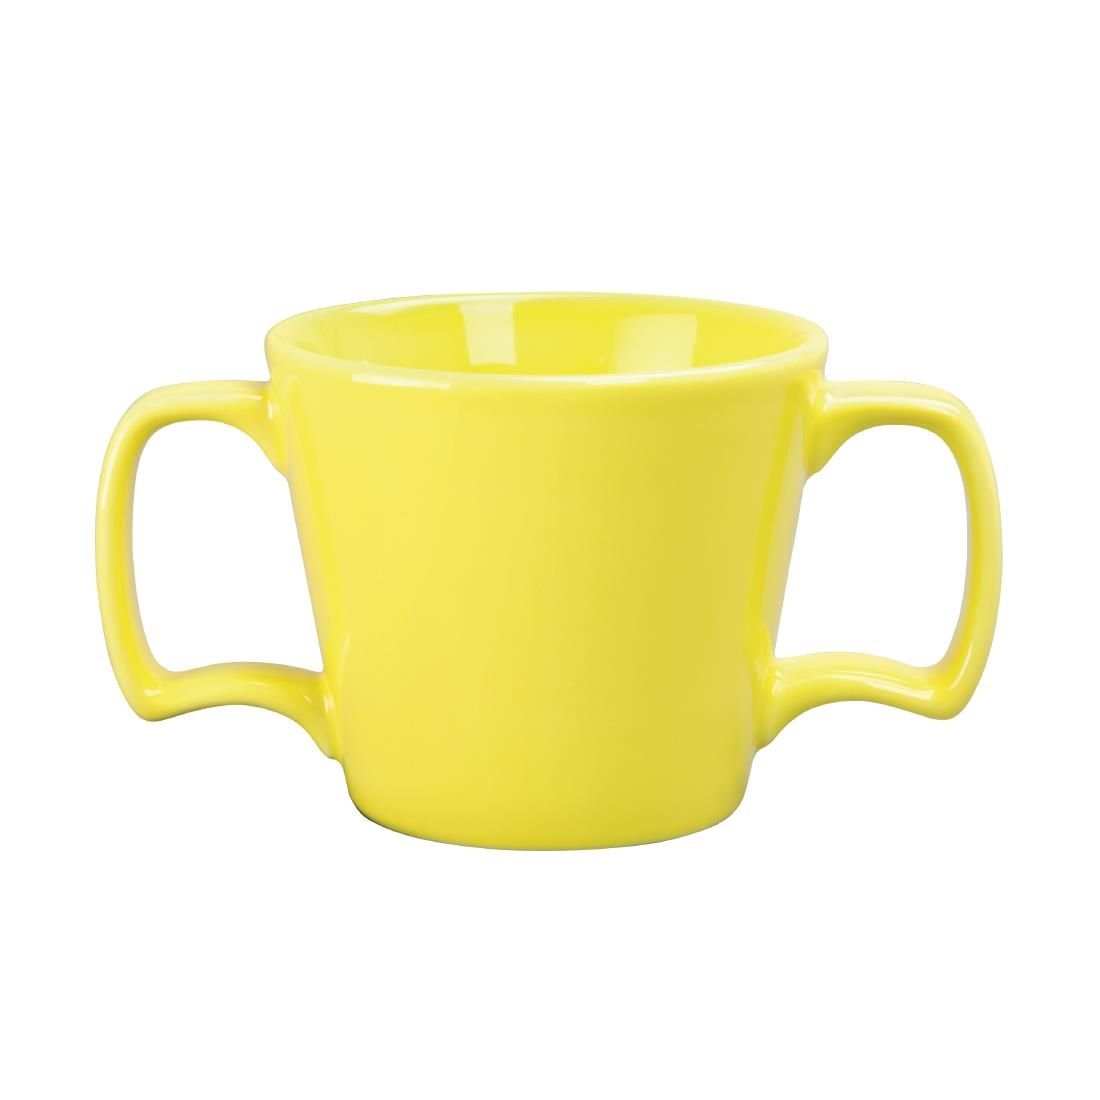 DW149 Olympia Heritage Double Handle Mugs Yellow 300ml (Pack of 6)